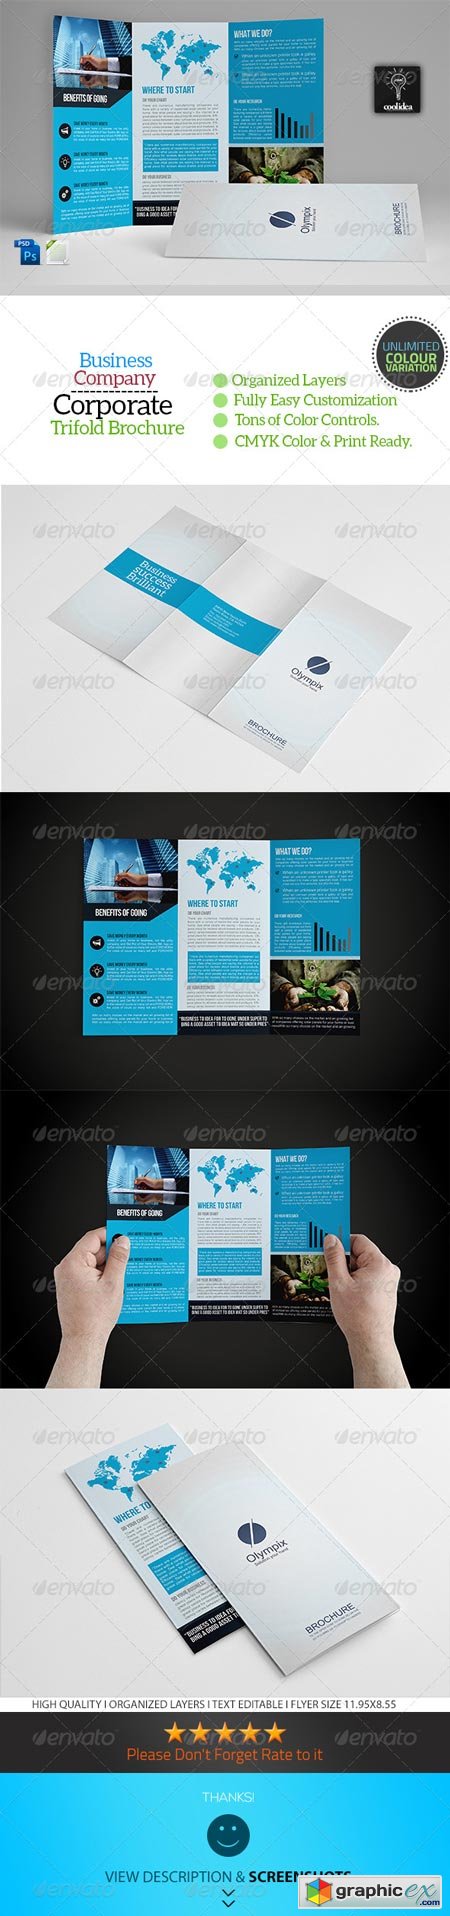 A4 Trifold Business Brochure Template Vol01 6756221